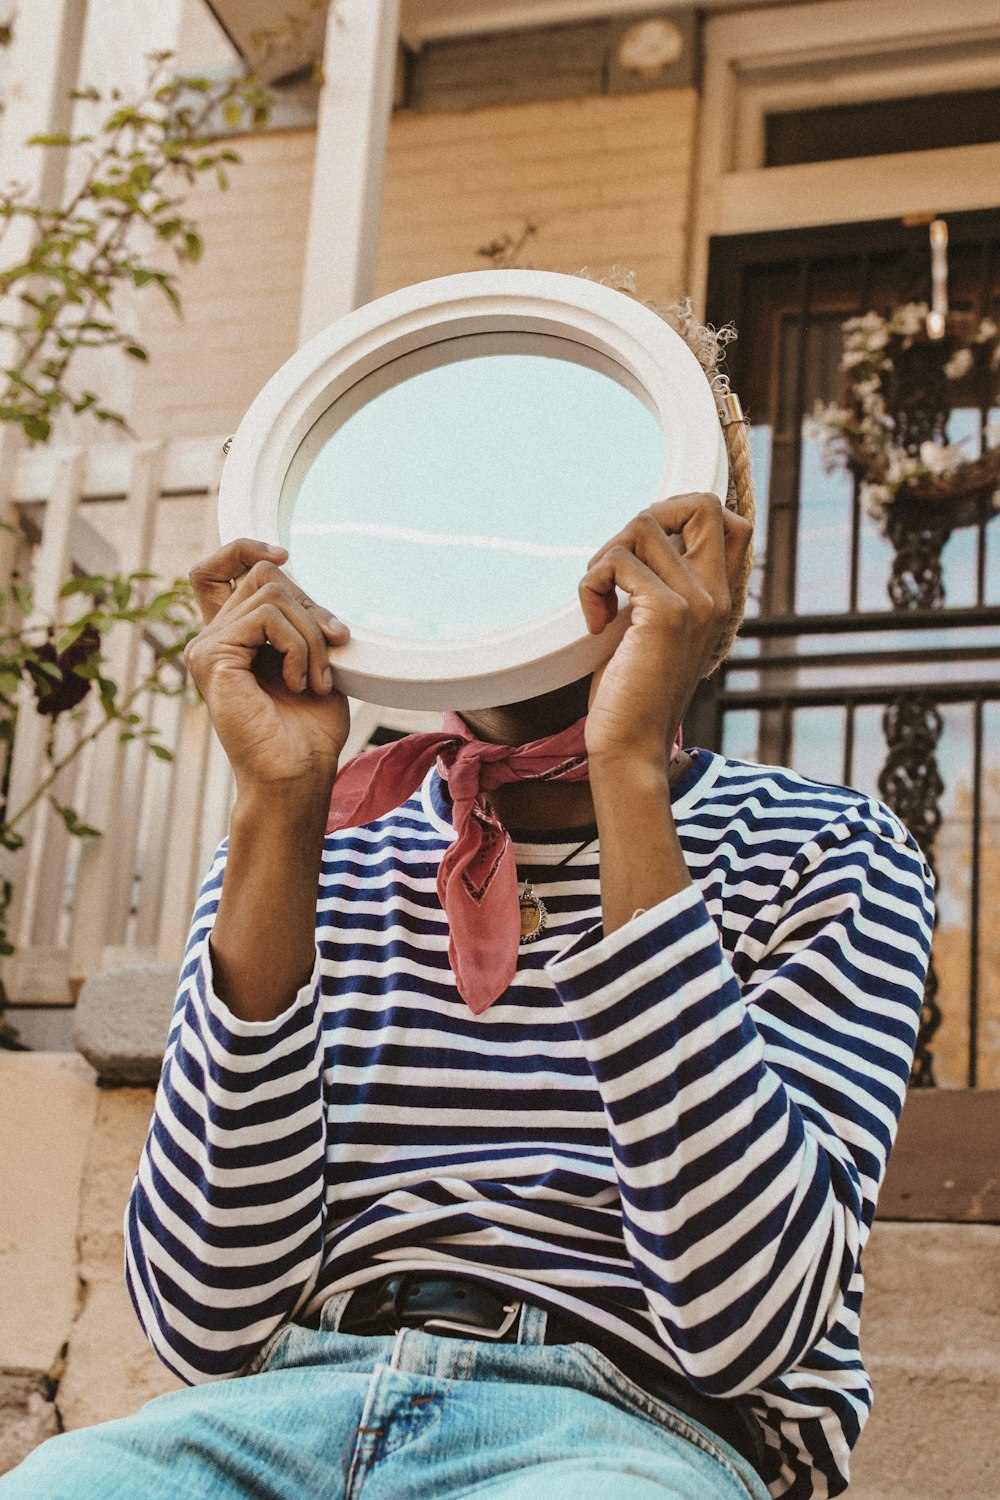 person in striped shirt holding round mirror